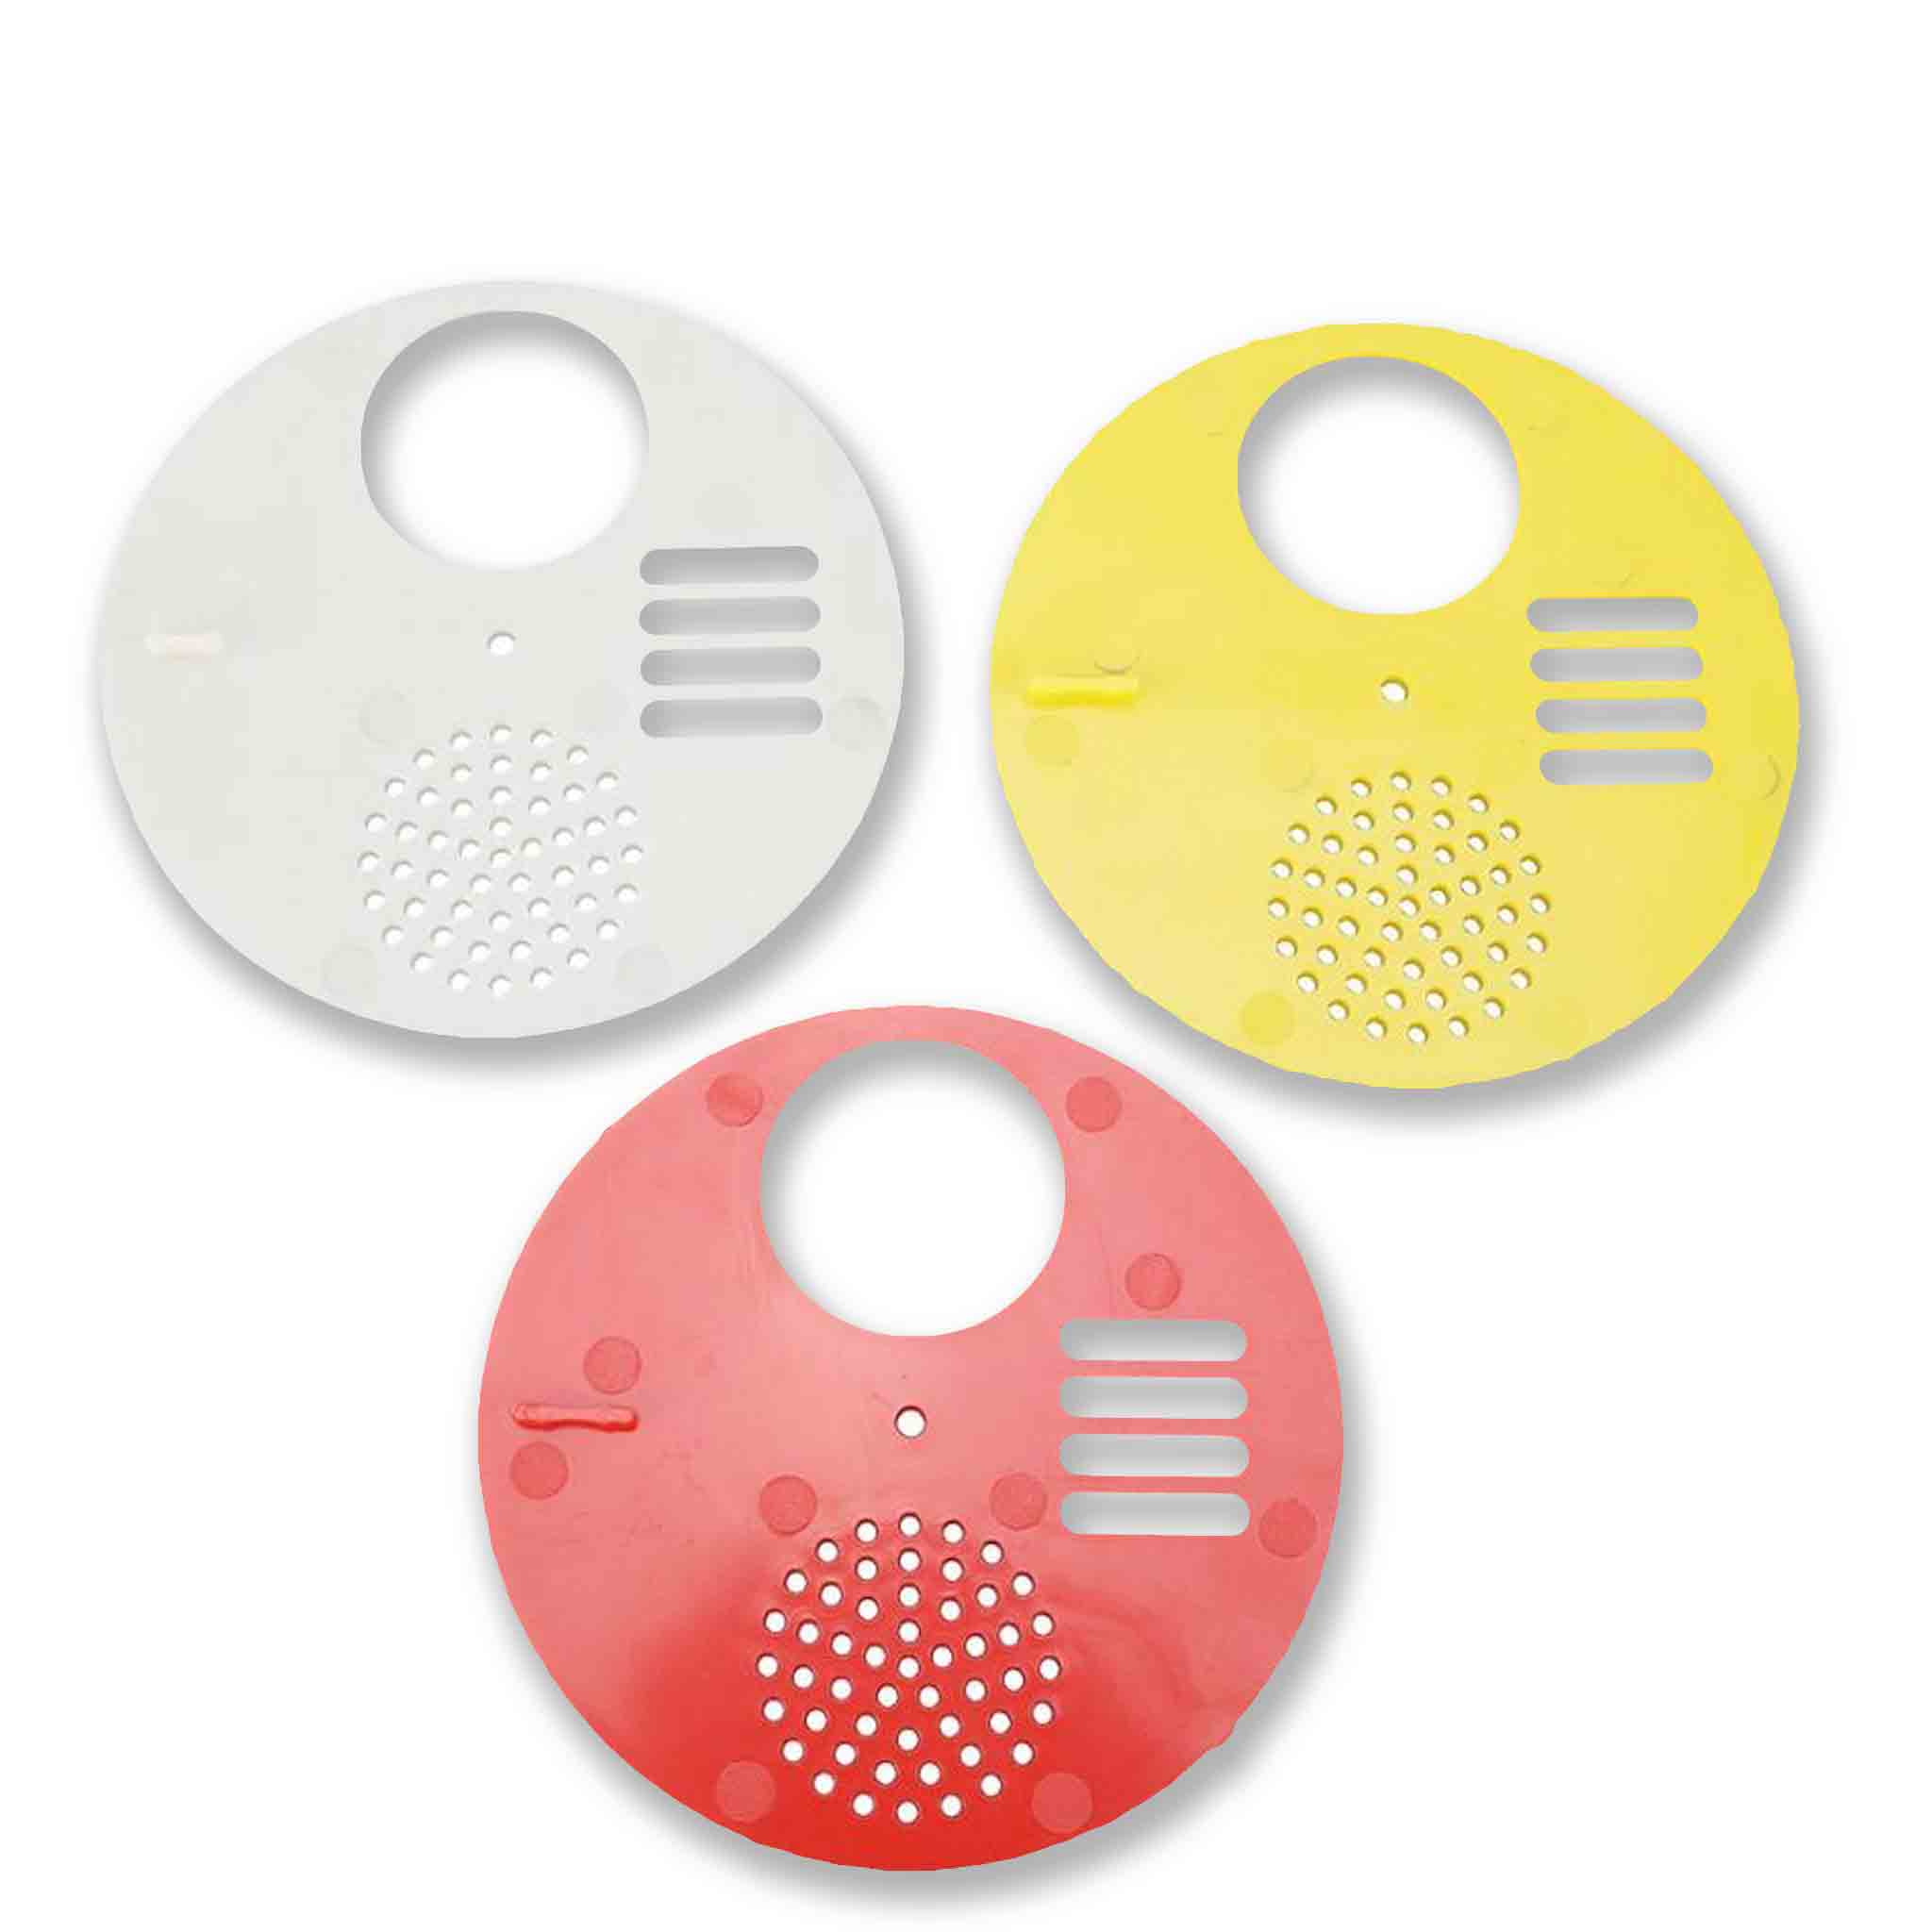 Round Disc Plastic Beehive Door Entrance, Gates and Ventilation (10 Pack) - Hive Parts collection by Buzzbee Beekeeping Supplies